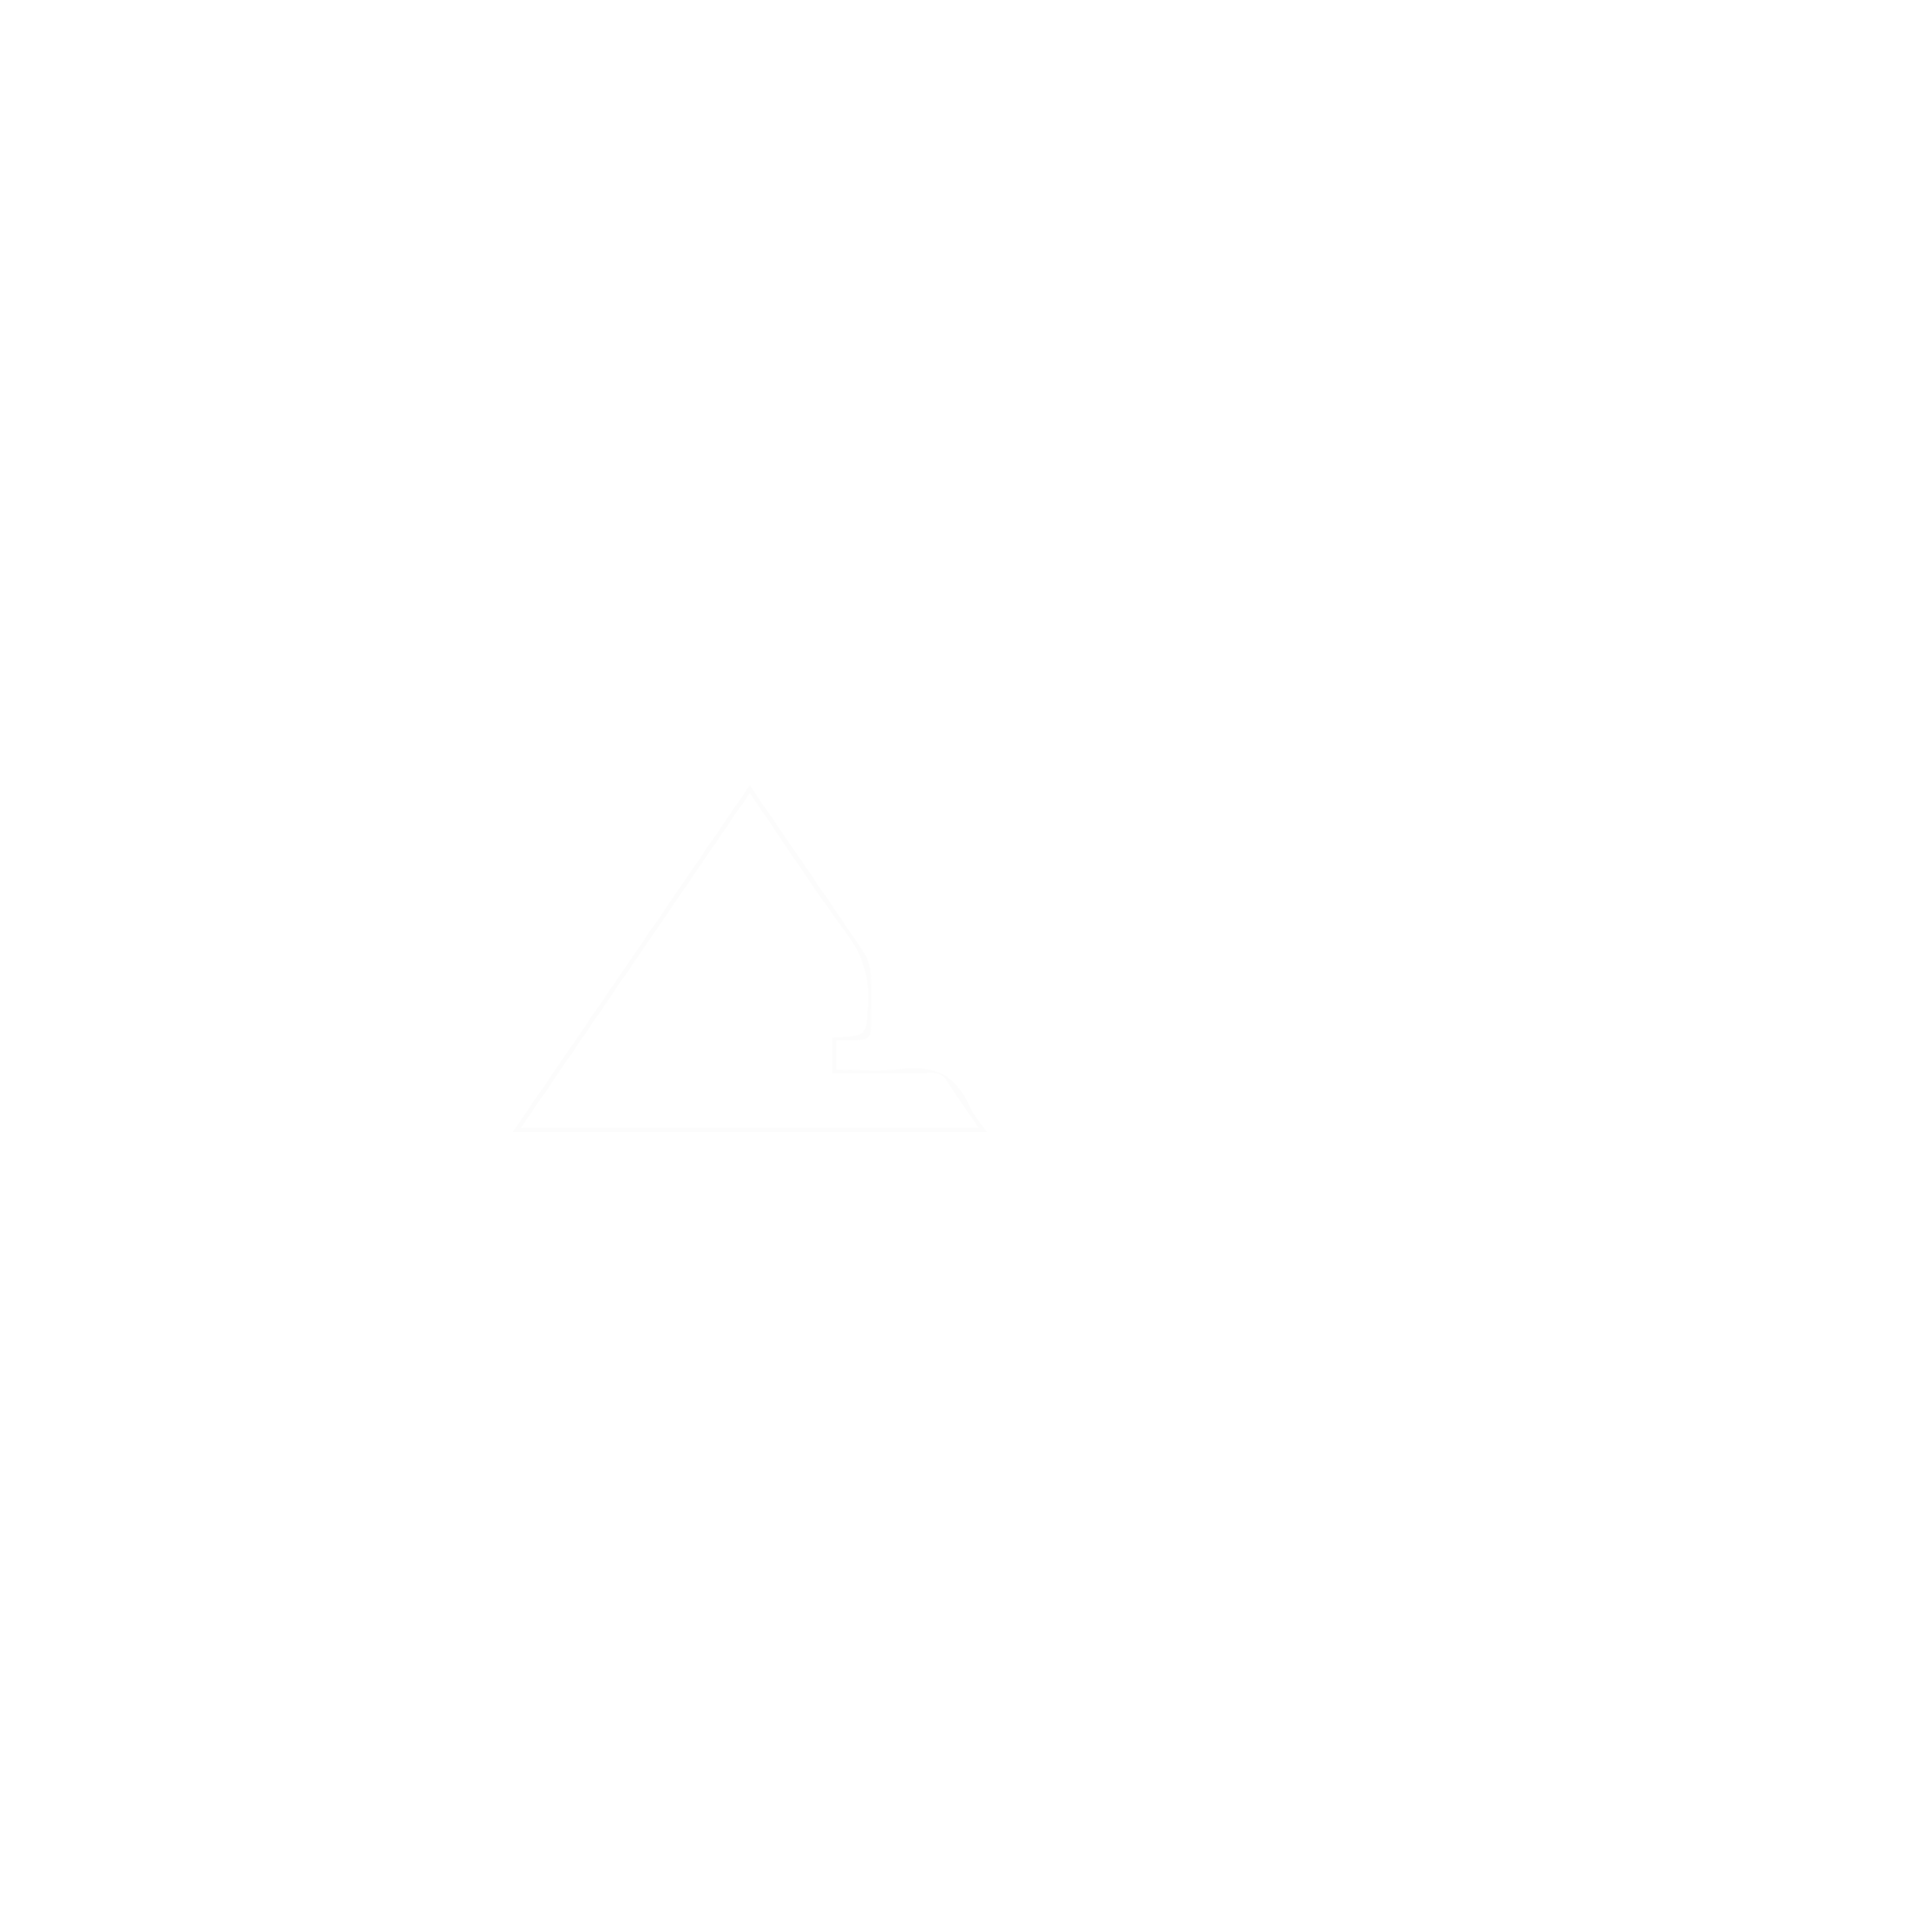 Independent Council on Aging